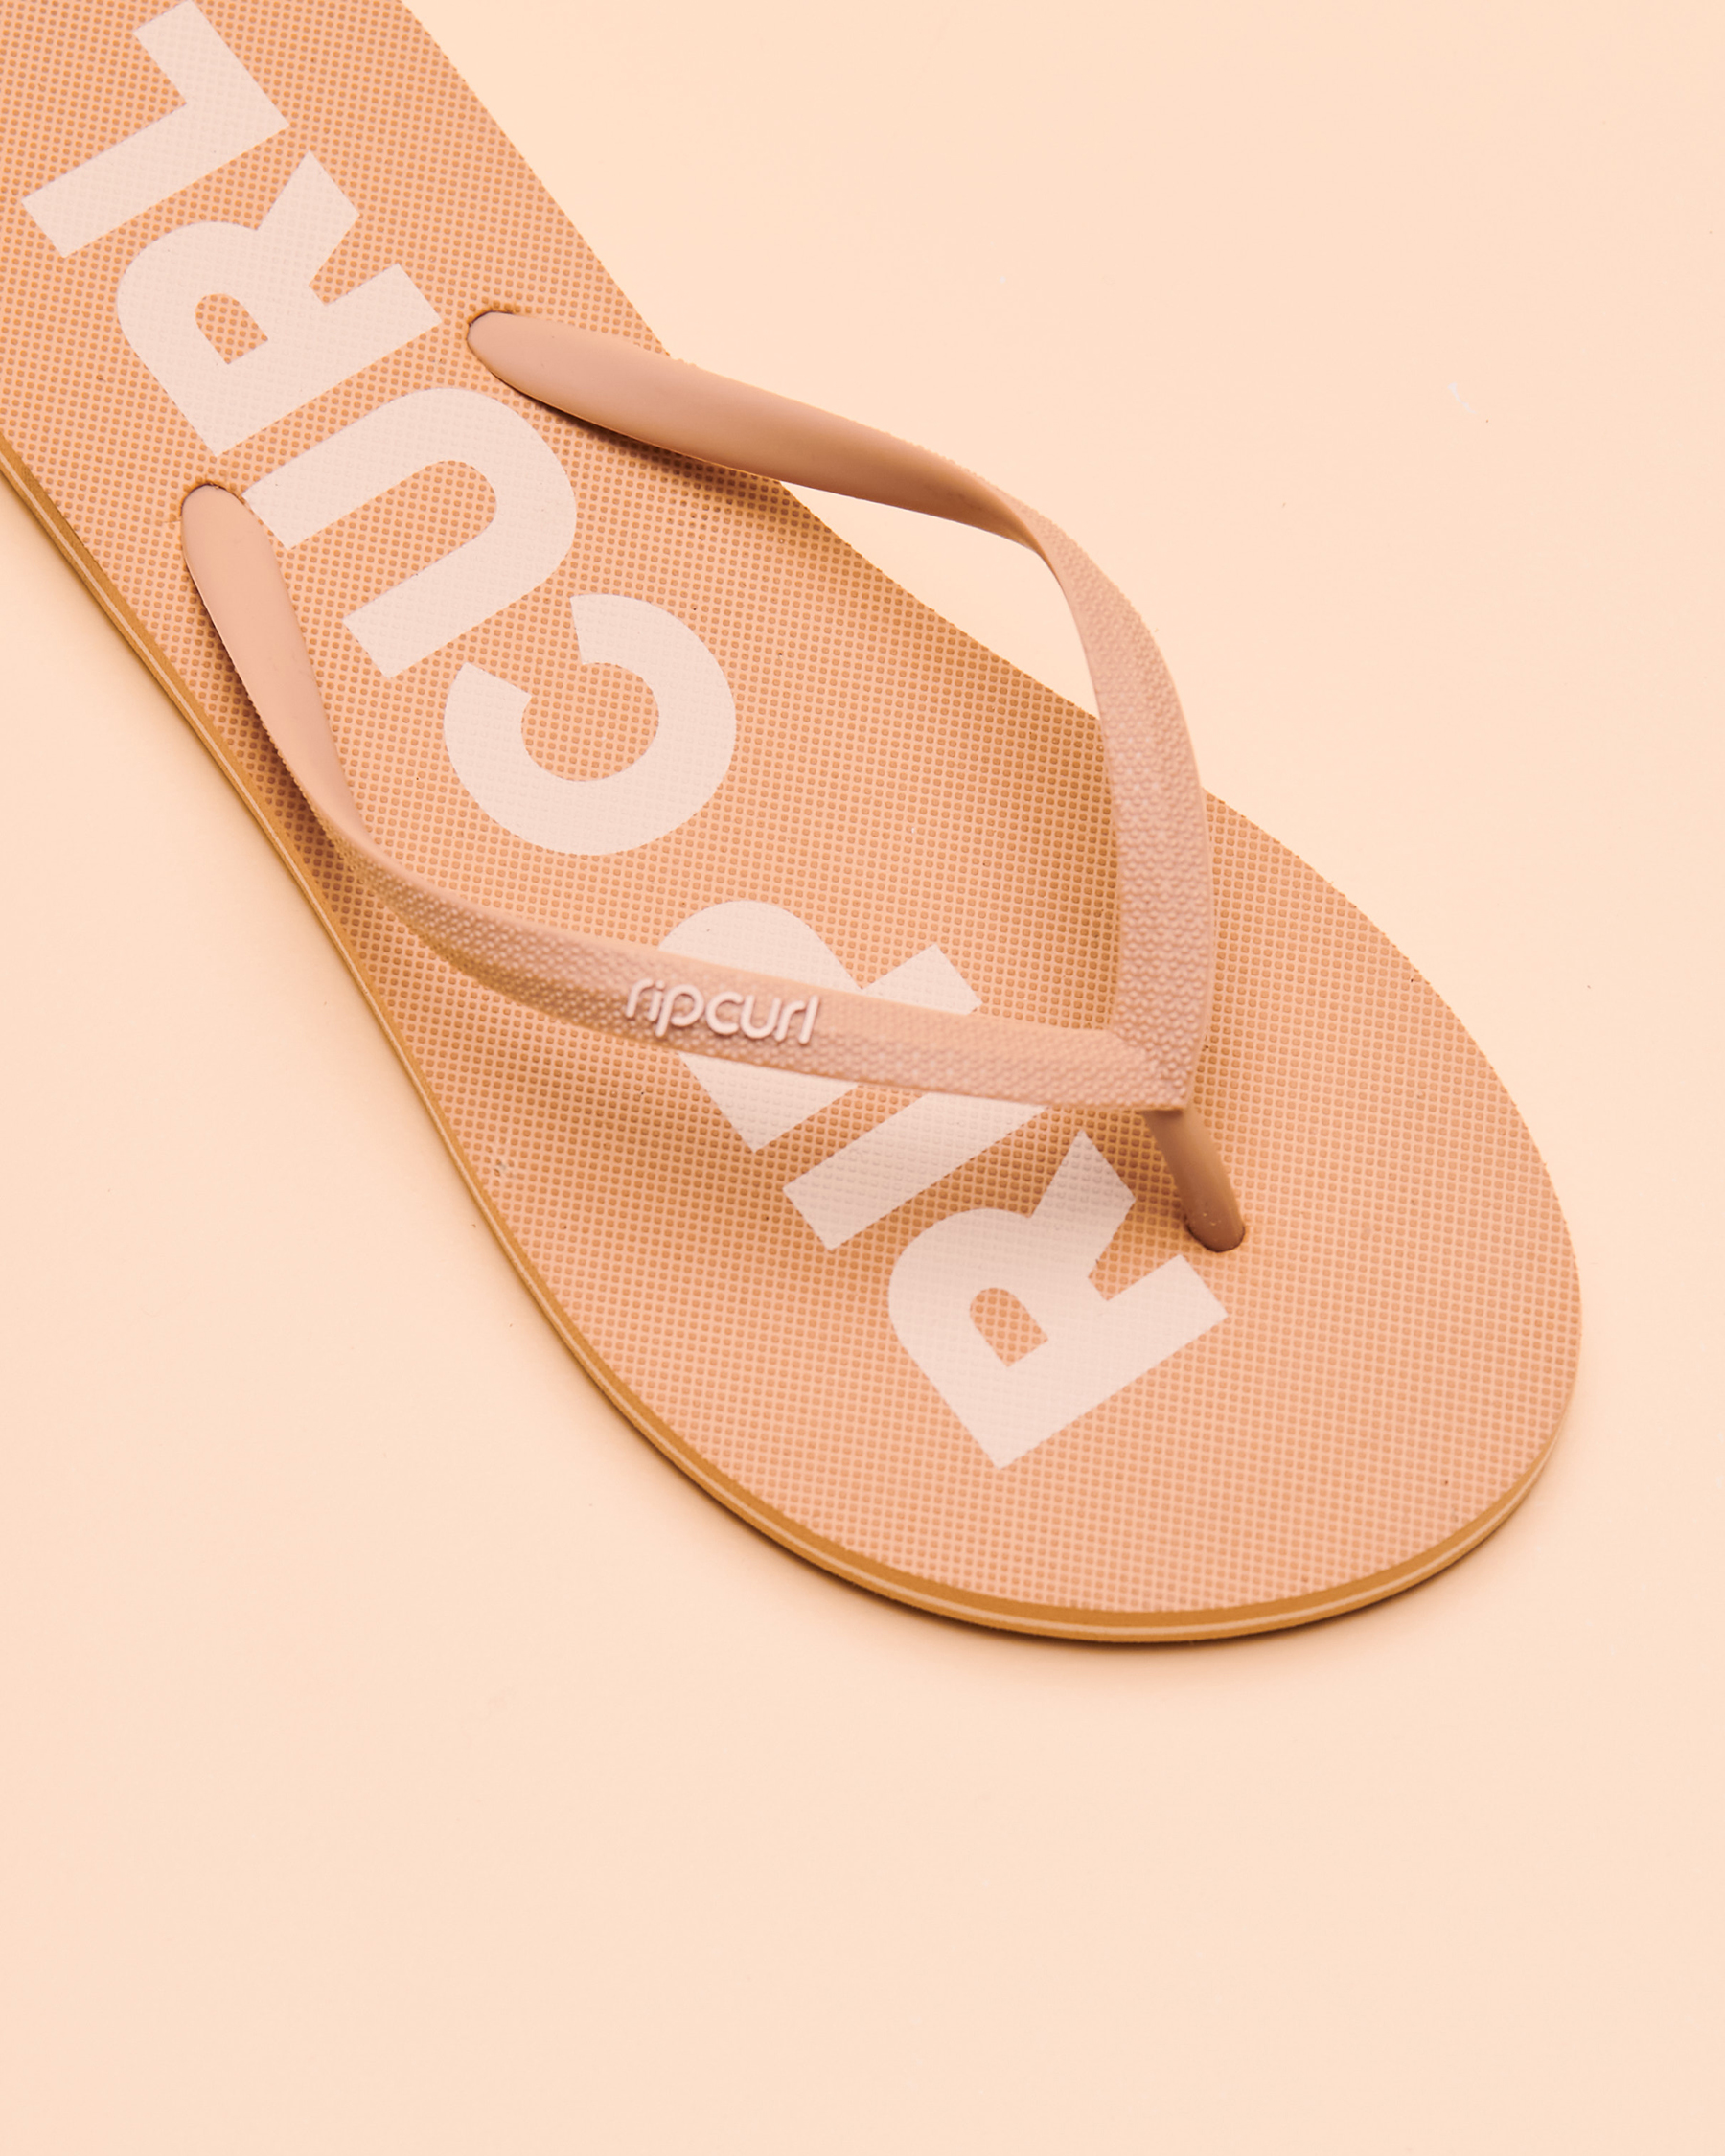 RIP CURL CLASSIC SURF Sandals Sand 158WOT - View3